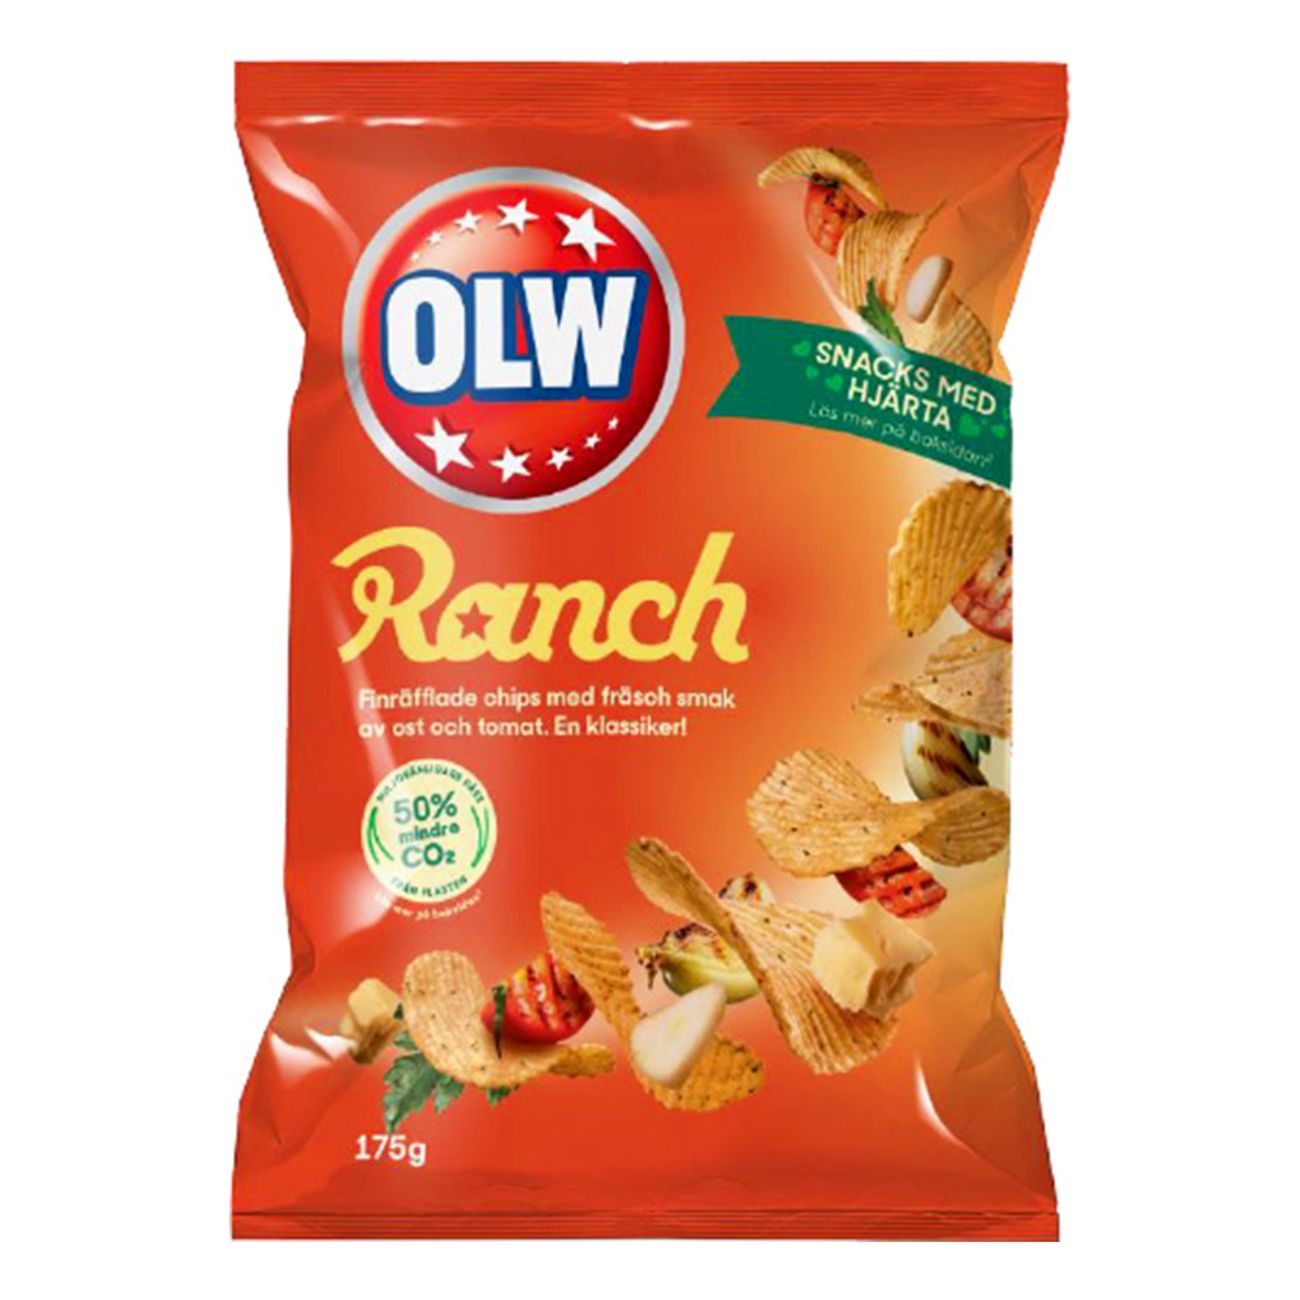 olw-ranch-chips-100893-1